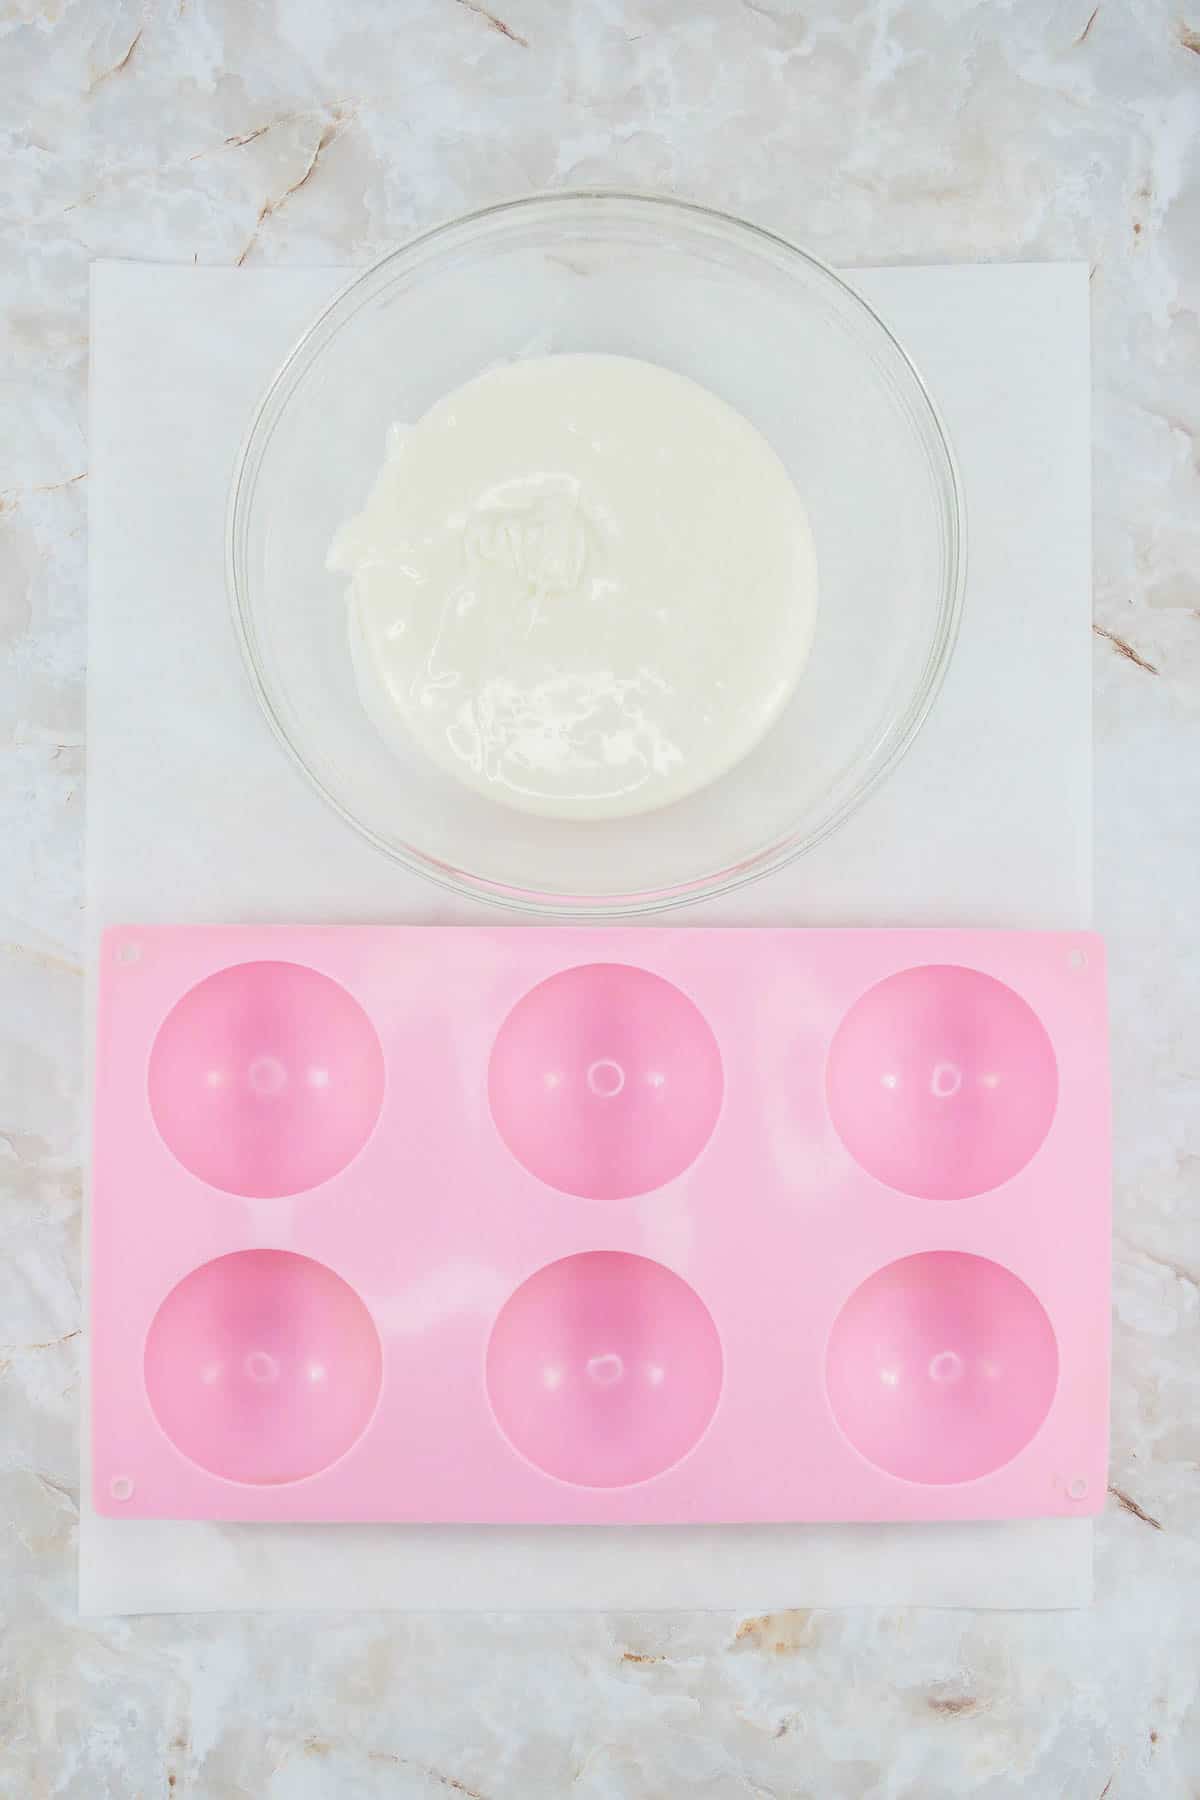 A bowl of melted white chocolate next to a pink silicone mould.